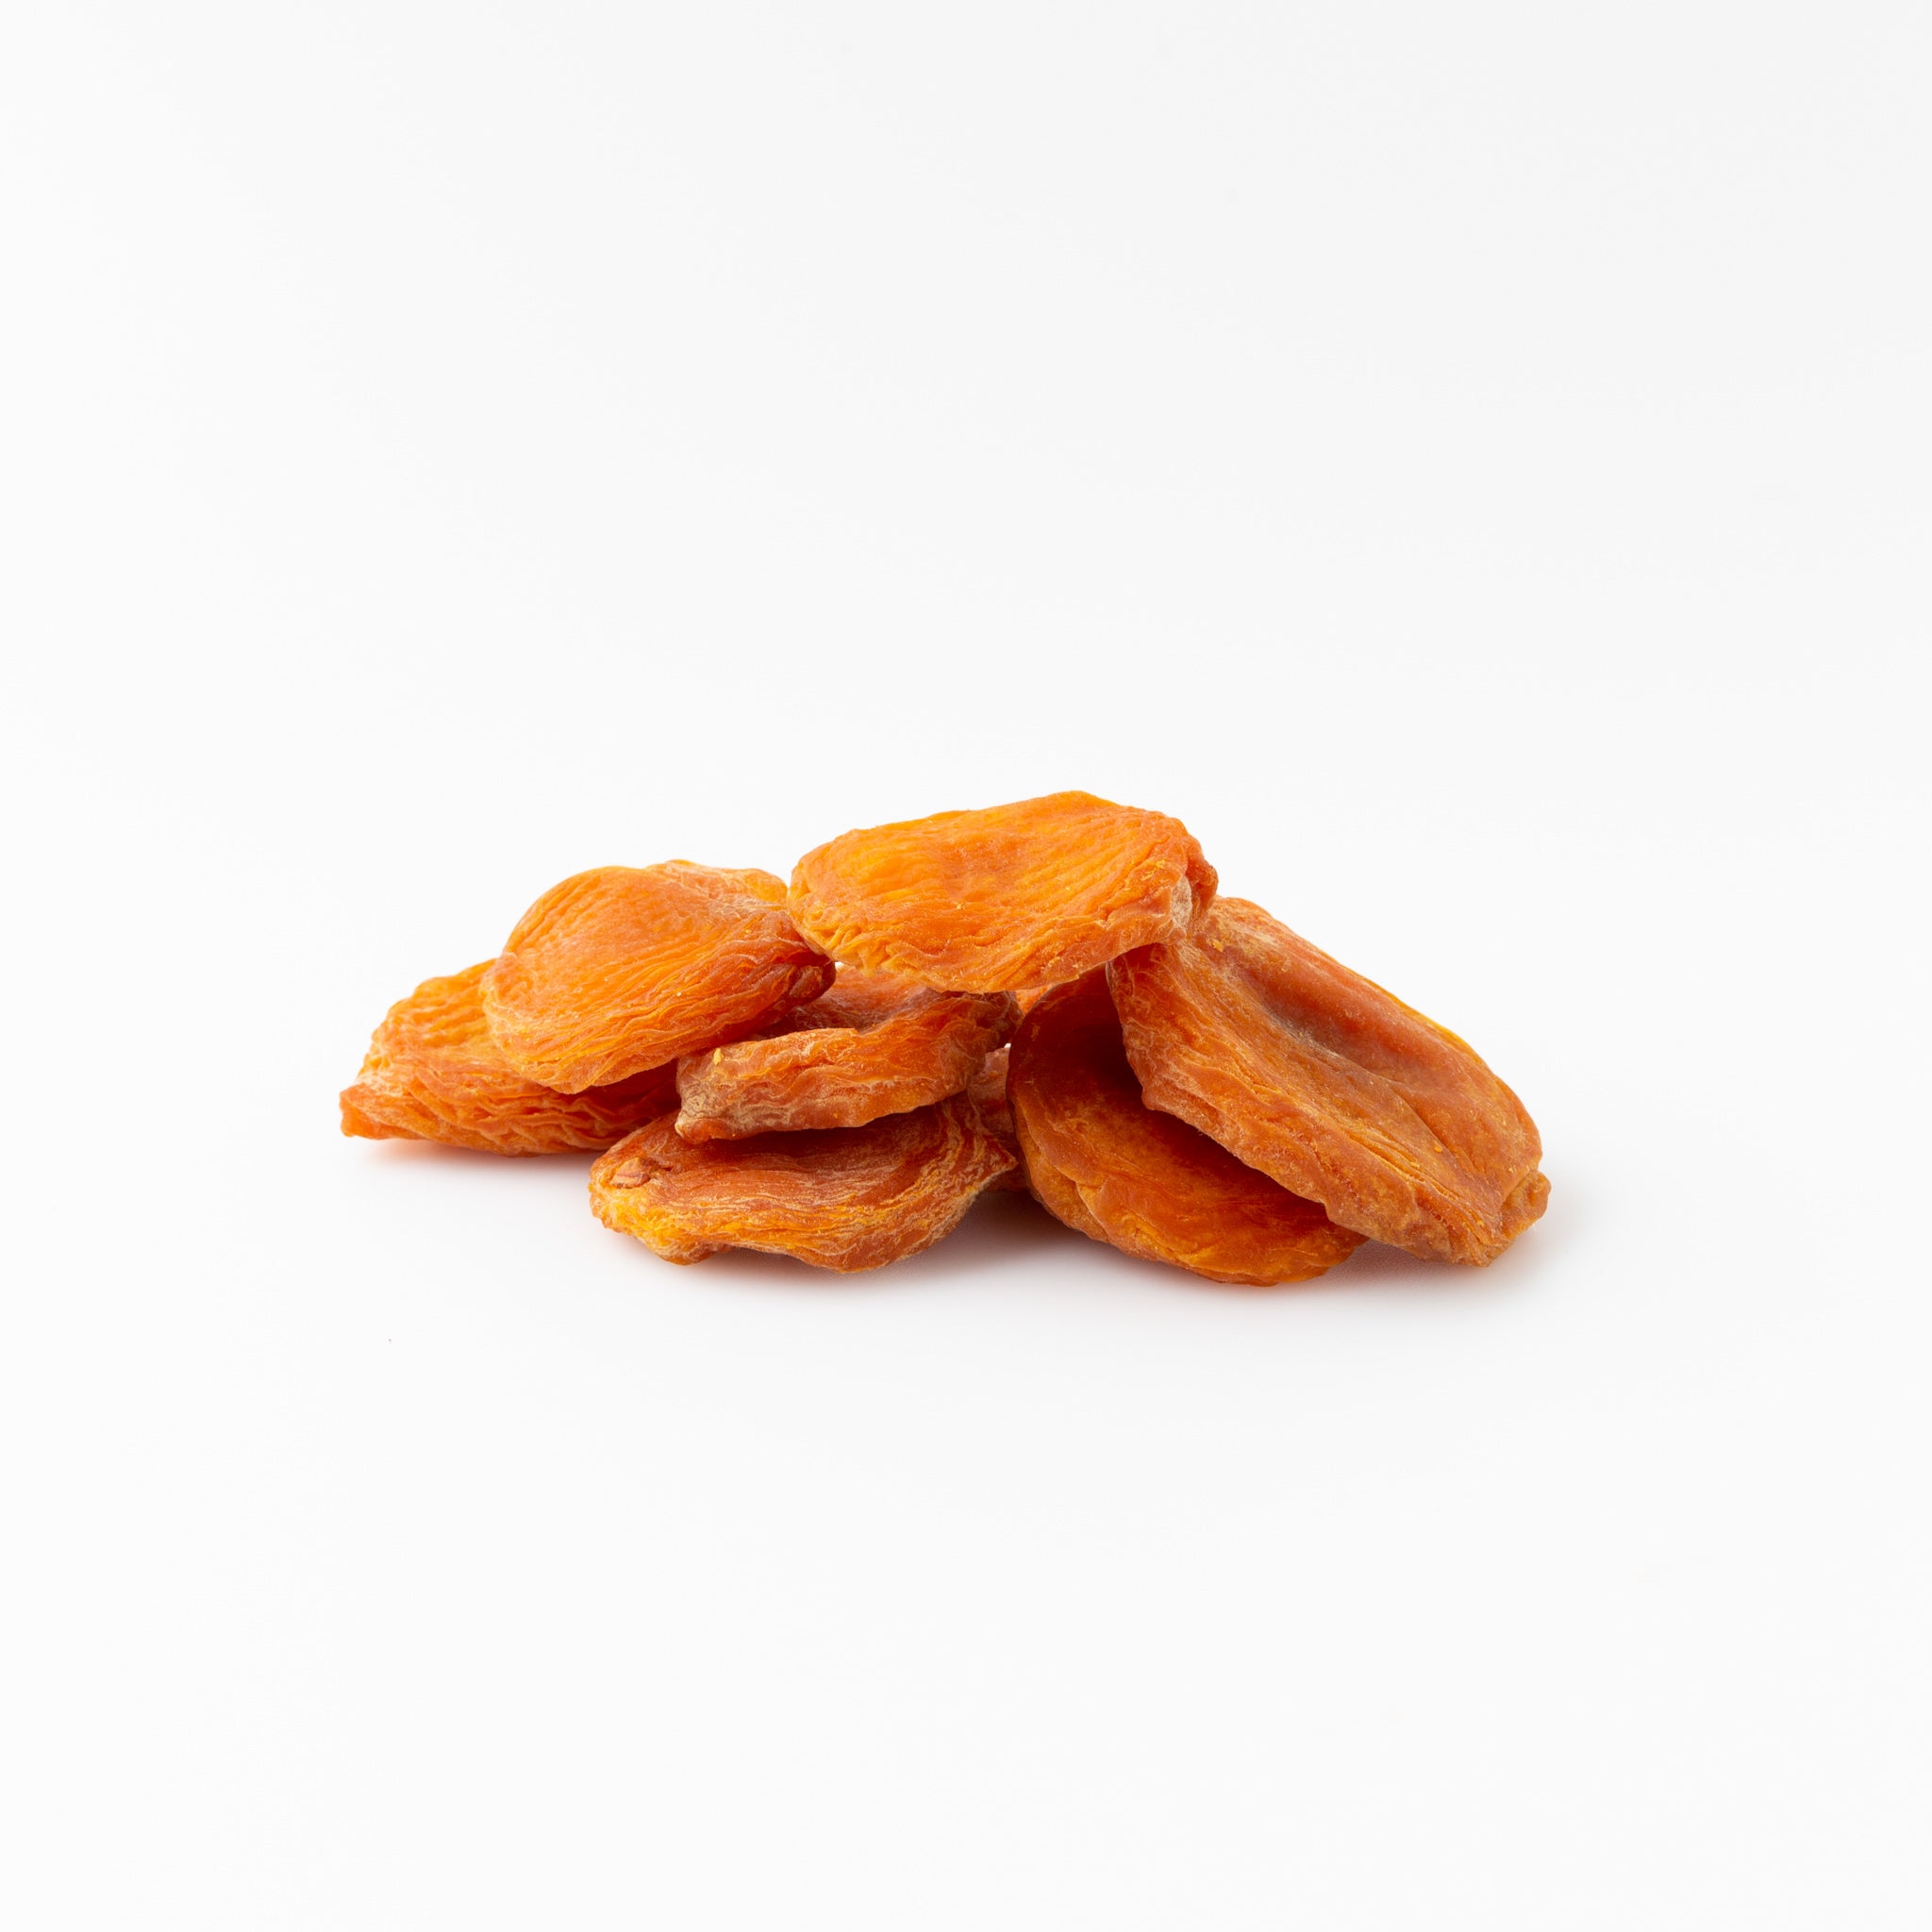 Dried Peaches (Dried Fruits) Image 3 - Naked Foods